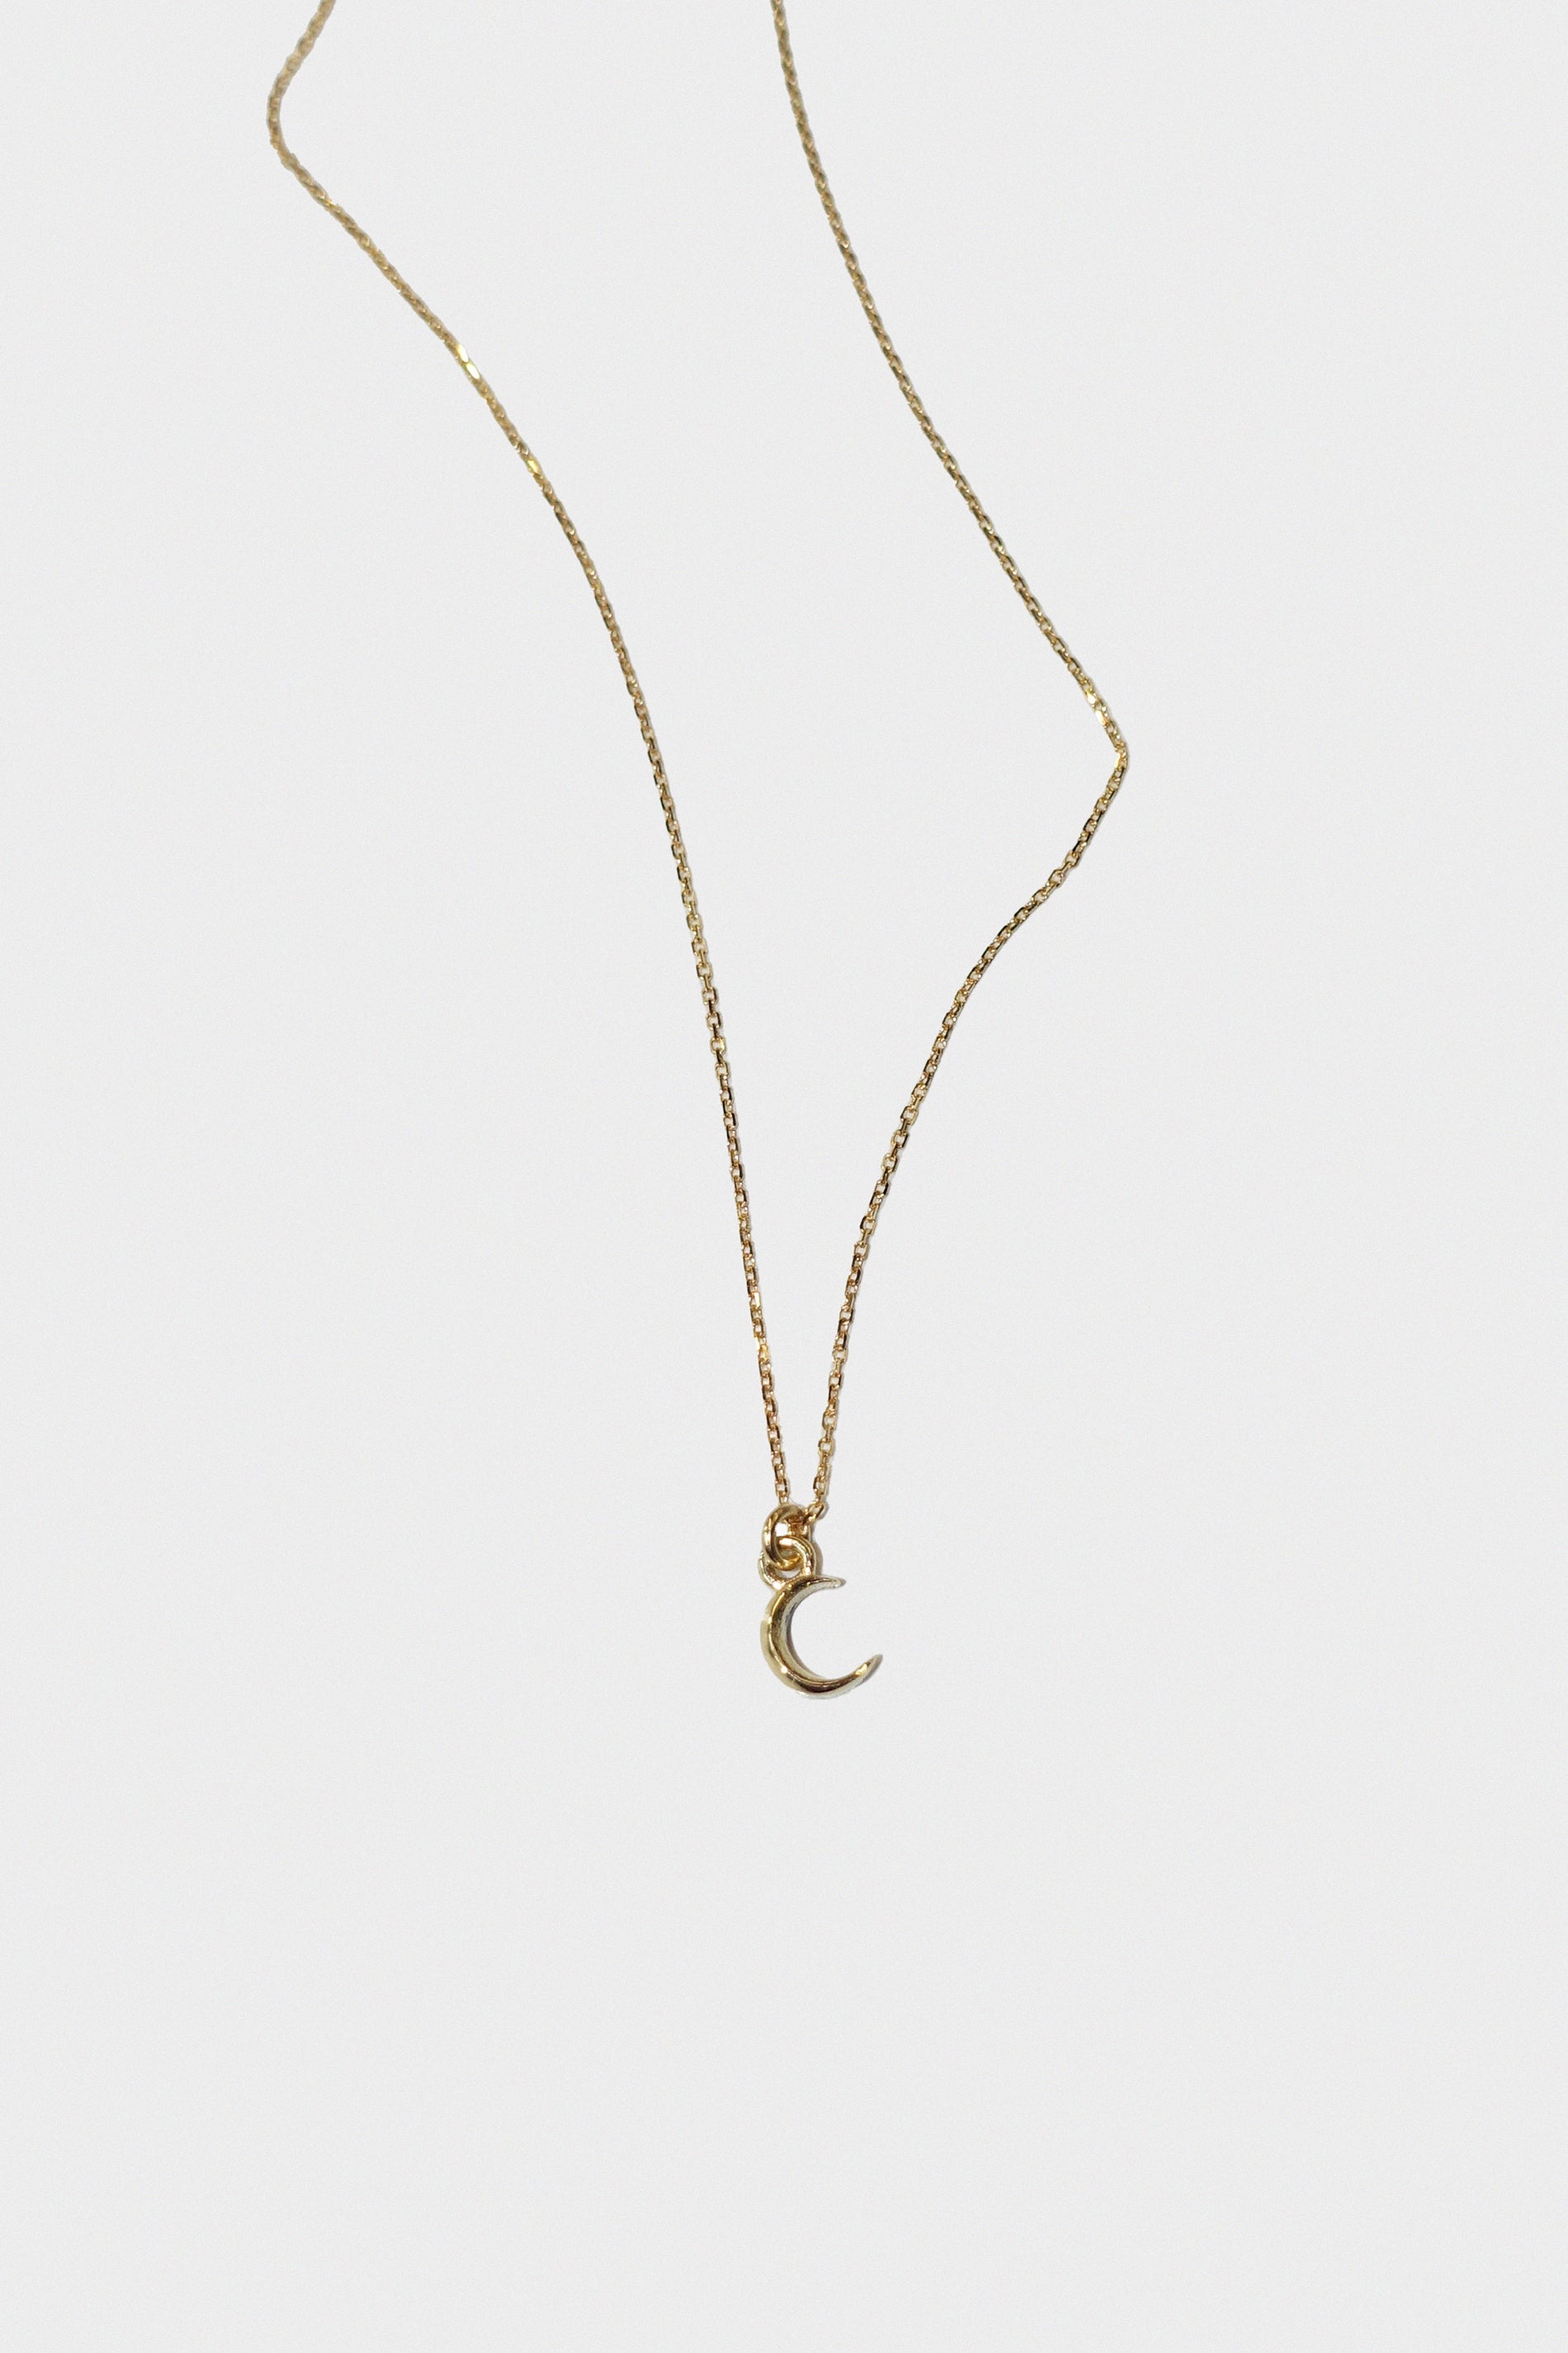 Itty Bitty Crescent Moon Pendant Necklace in 14k Gold